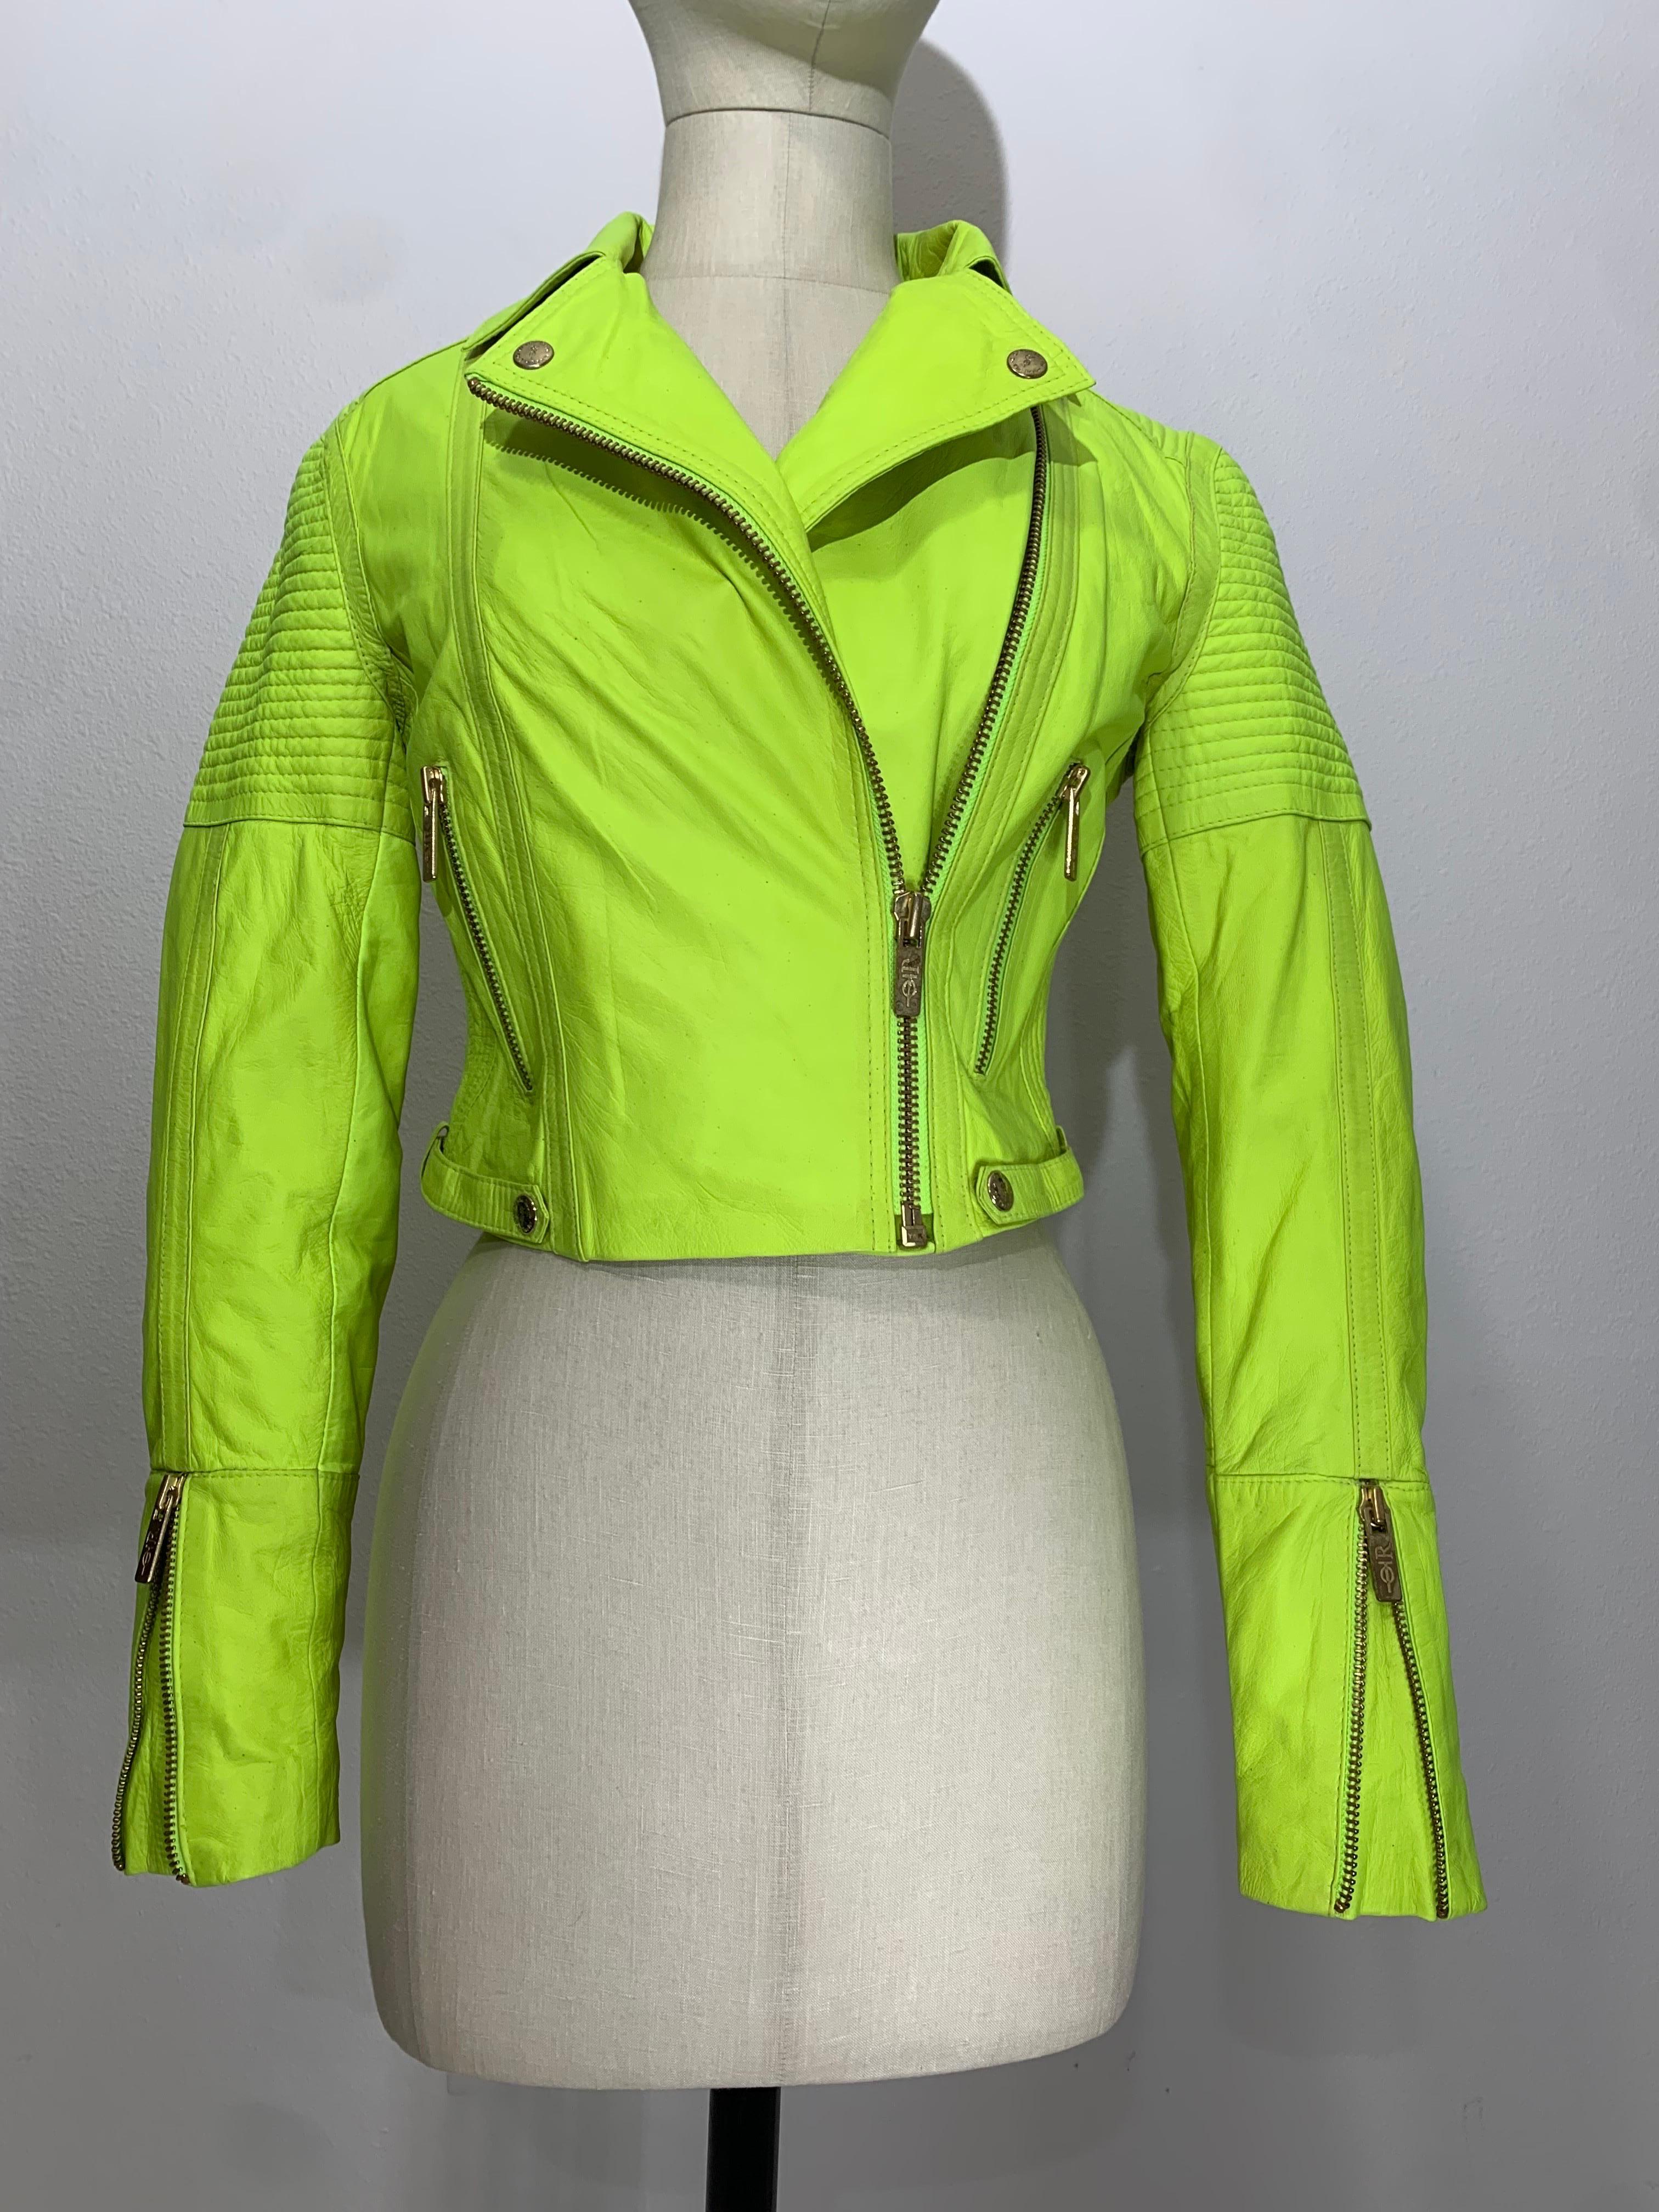 Neon Green Leather Cropped Motorcycle-Style Jacket w Quilted Shoulders & Zippers In New Condition For Sale In Gresham, OR